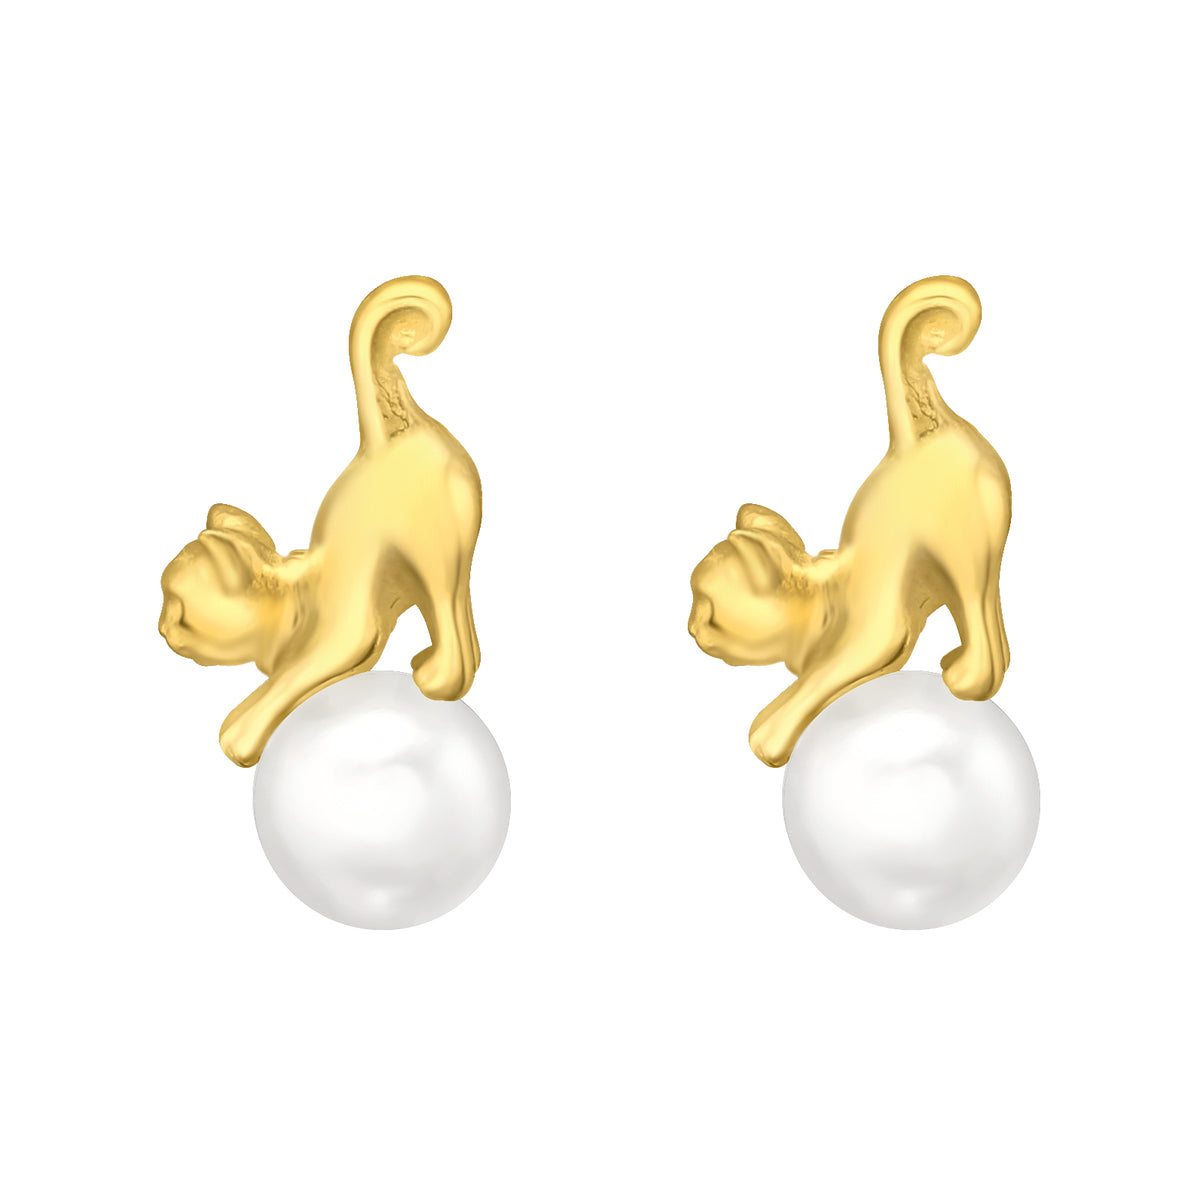 Girls love cats and pearls, gold plated earrings